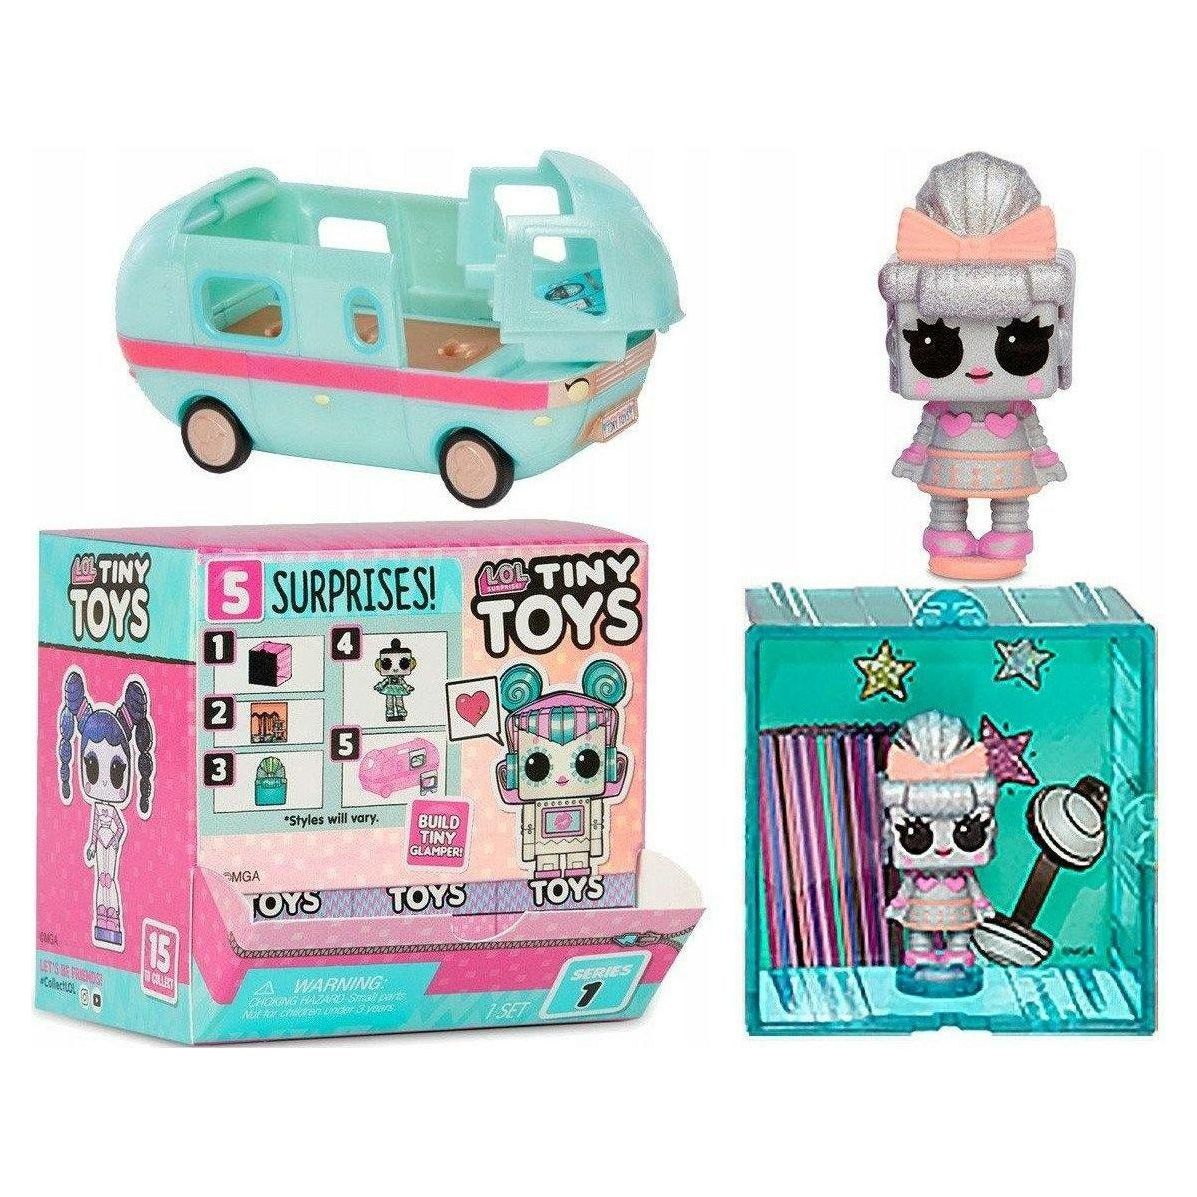 L.O.L Surprise Tiny Toys Series 1 With 5 Surprises - BumbleToys - 5-7 Years, Arabic Triangle Trading, Dolls, Fashion Dolls & Accessories, Girls, L.O.L